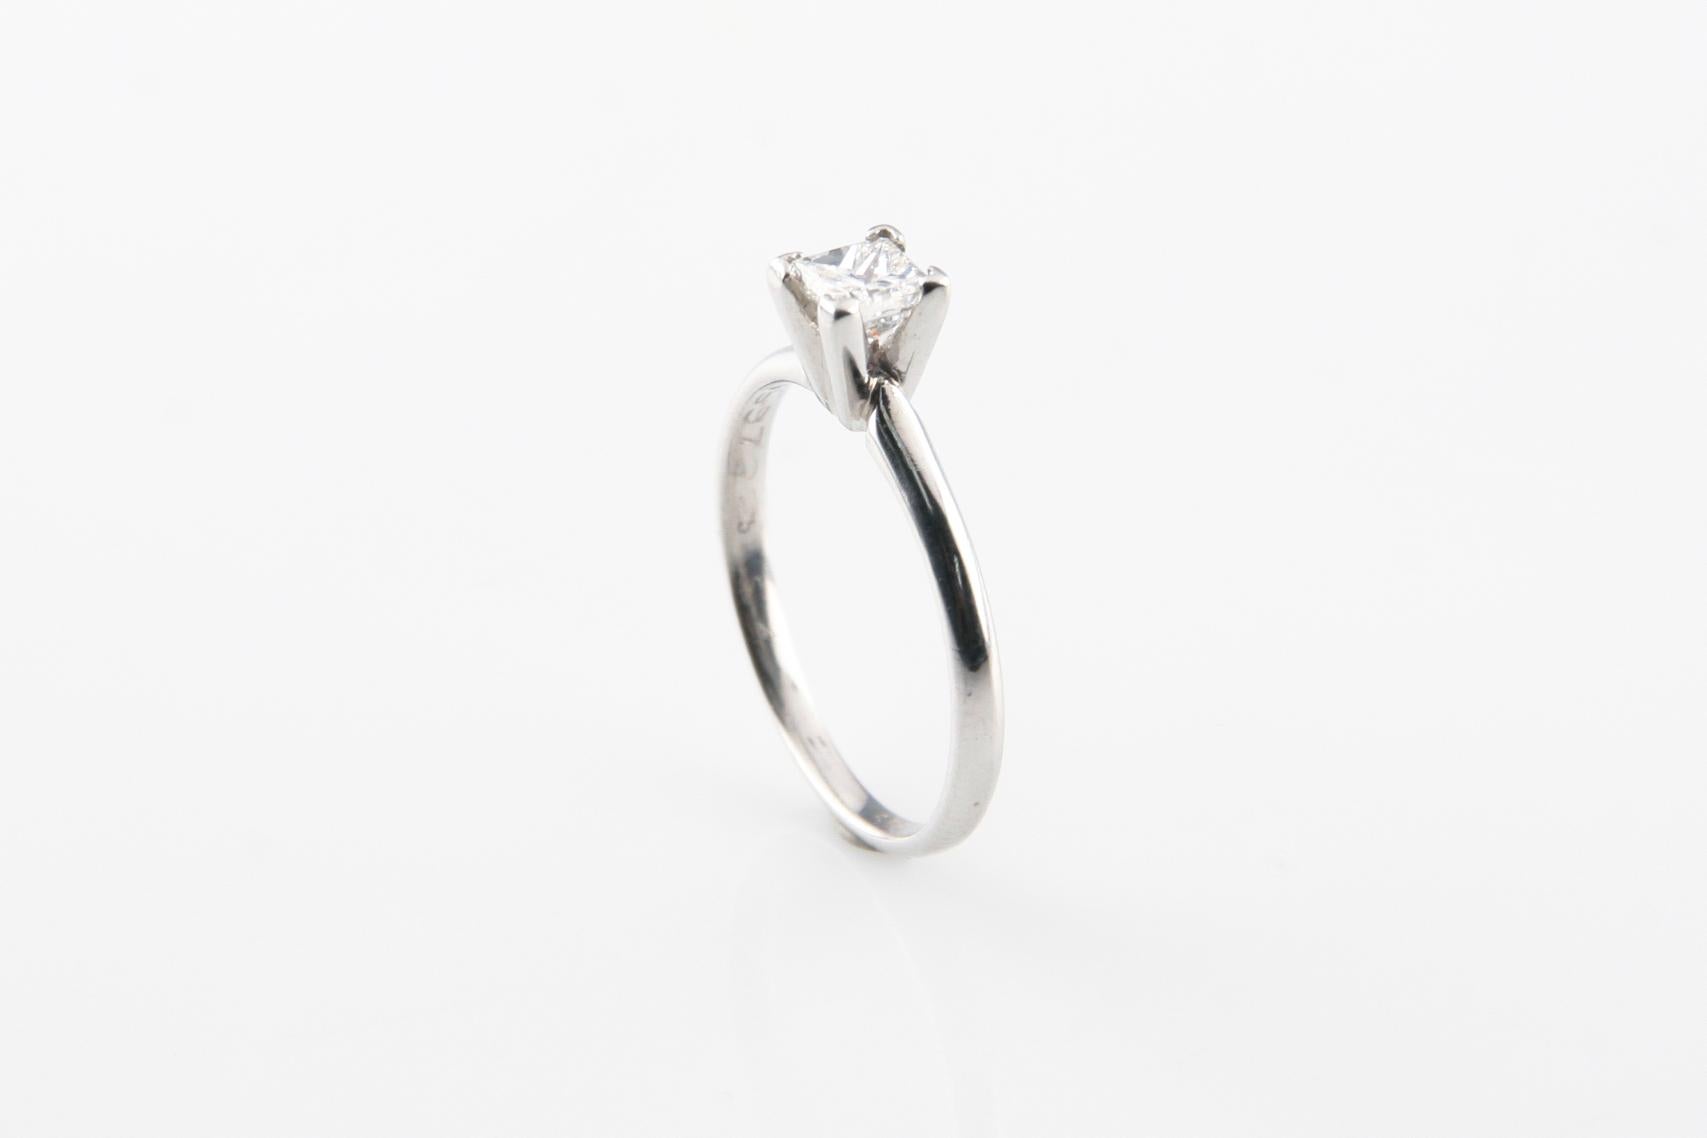 Ring Size: 7.5
Metal: Platinum
Style: Solitaire
Diamond weight: 0.56 CT.     
Color Approximately: H      
Clarity Approximately: VS2      
Depth Approximately: 88.1%    
Table Approximately: 71.4%
Total weight: 3.69 GR. 
Condition: Good 